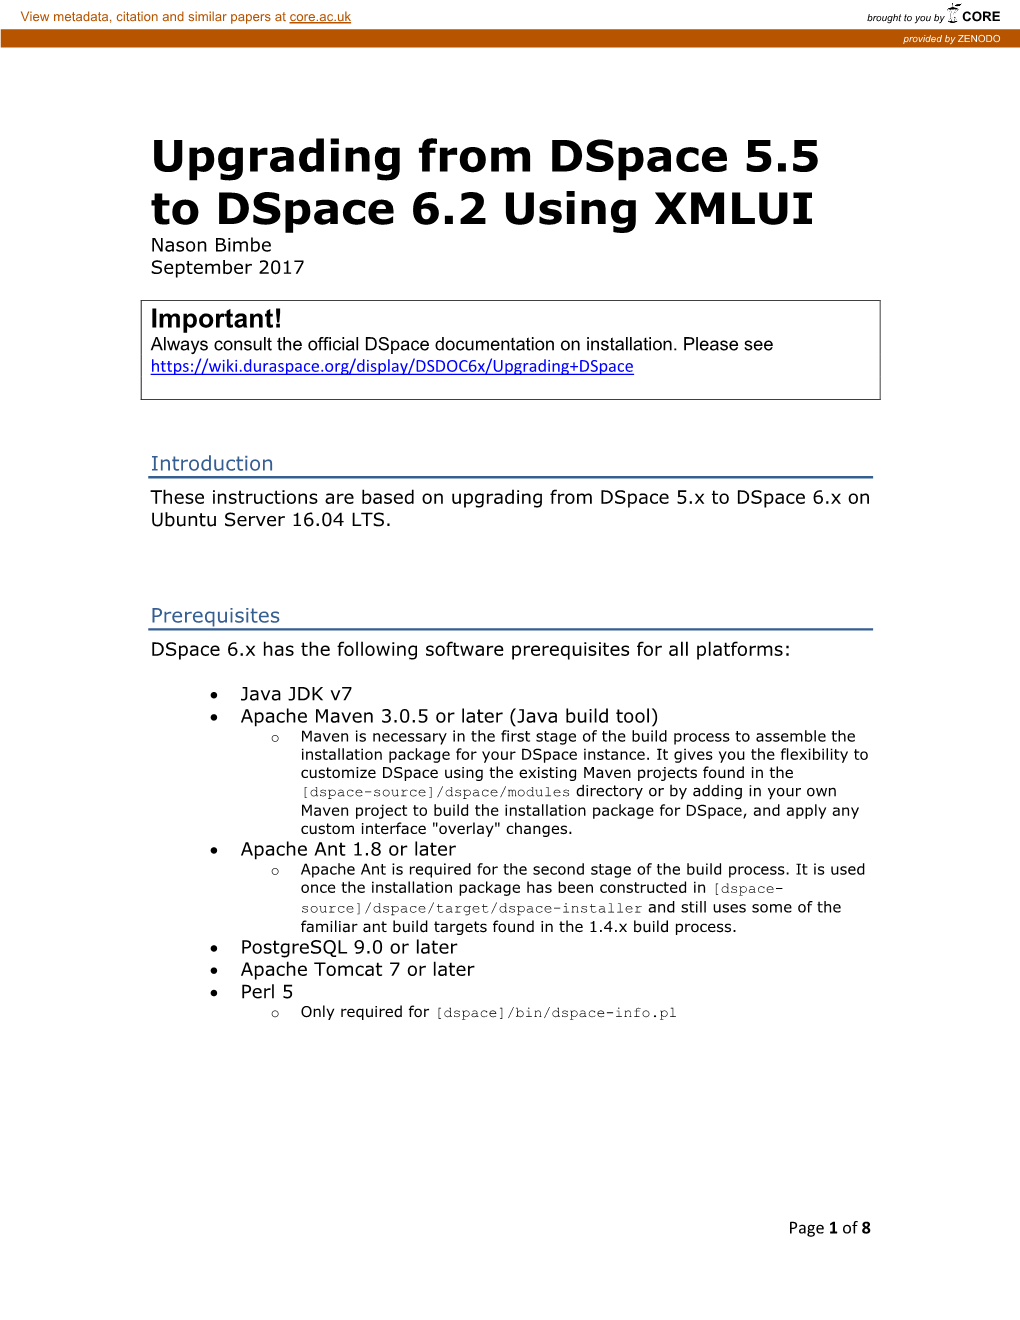 Upgrading from Dspace 5.5 to Dspace 6.2 Using XMLUI Nason Bimbe September 2017